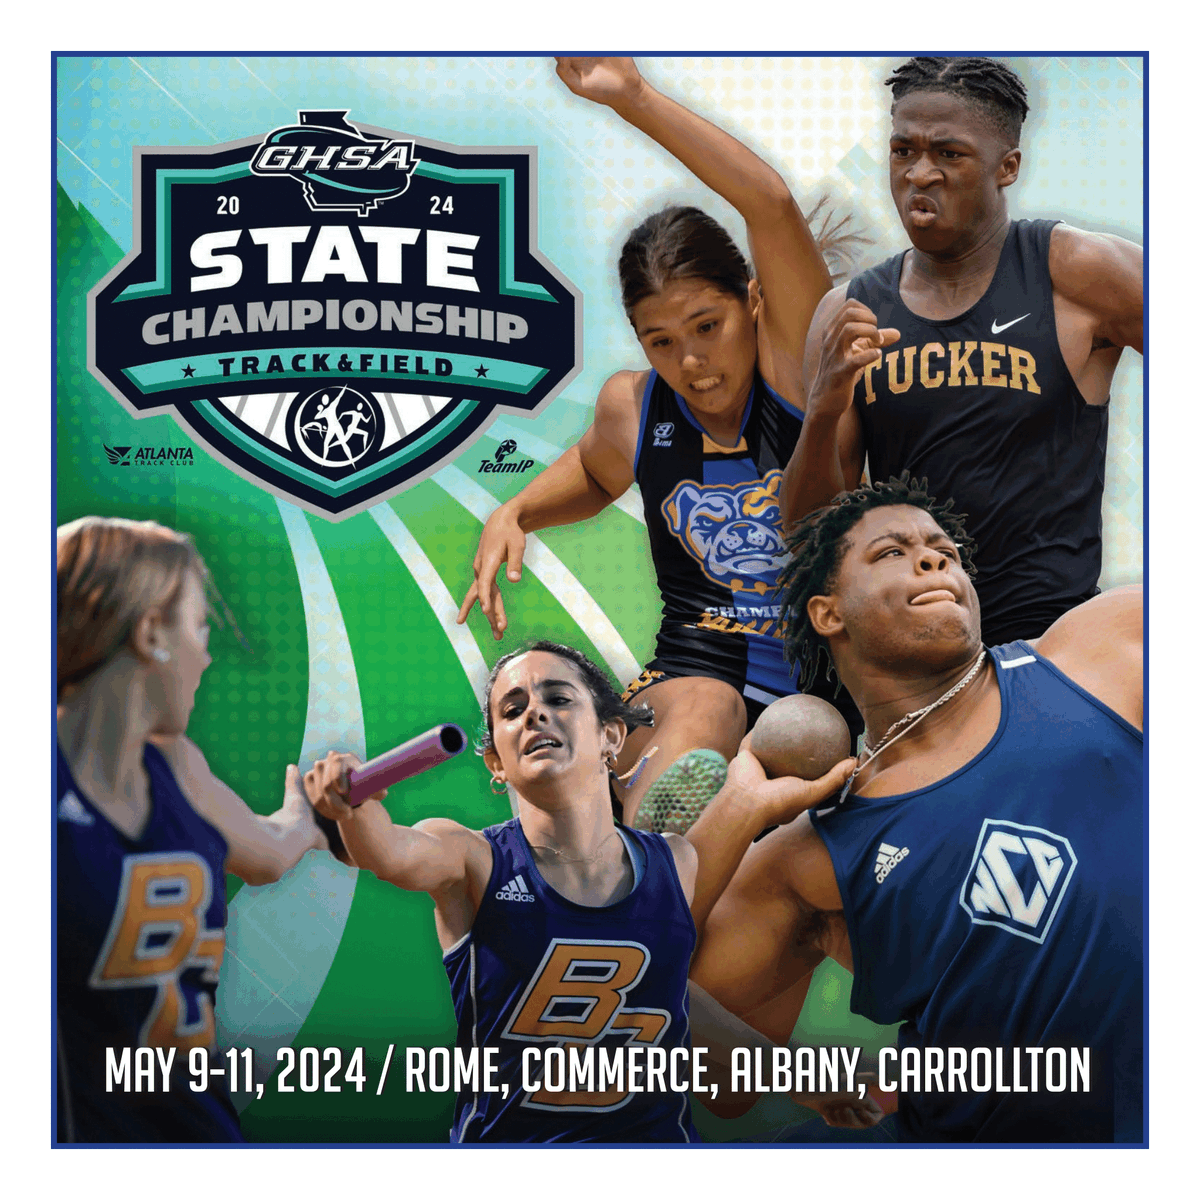 FINALS DAY - Track & Field State Championship Saturday races 🥇 🏅 🥈 🎽. Get schedule, fan guide & @MileSplitGA results. Tickets @GoFanHS. Watck live @NFHSNetwork. bit.ly/3w0azGW